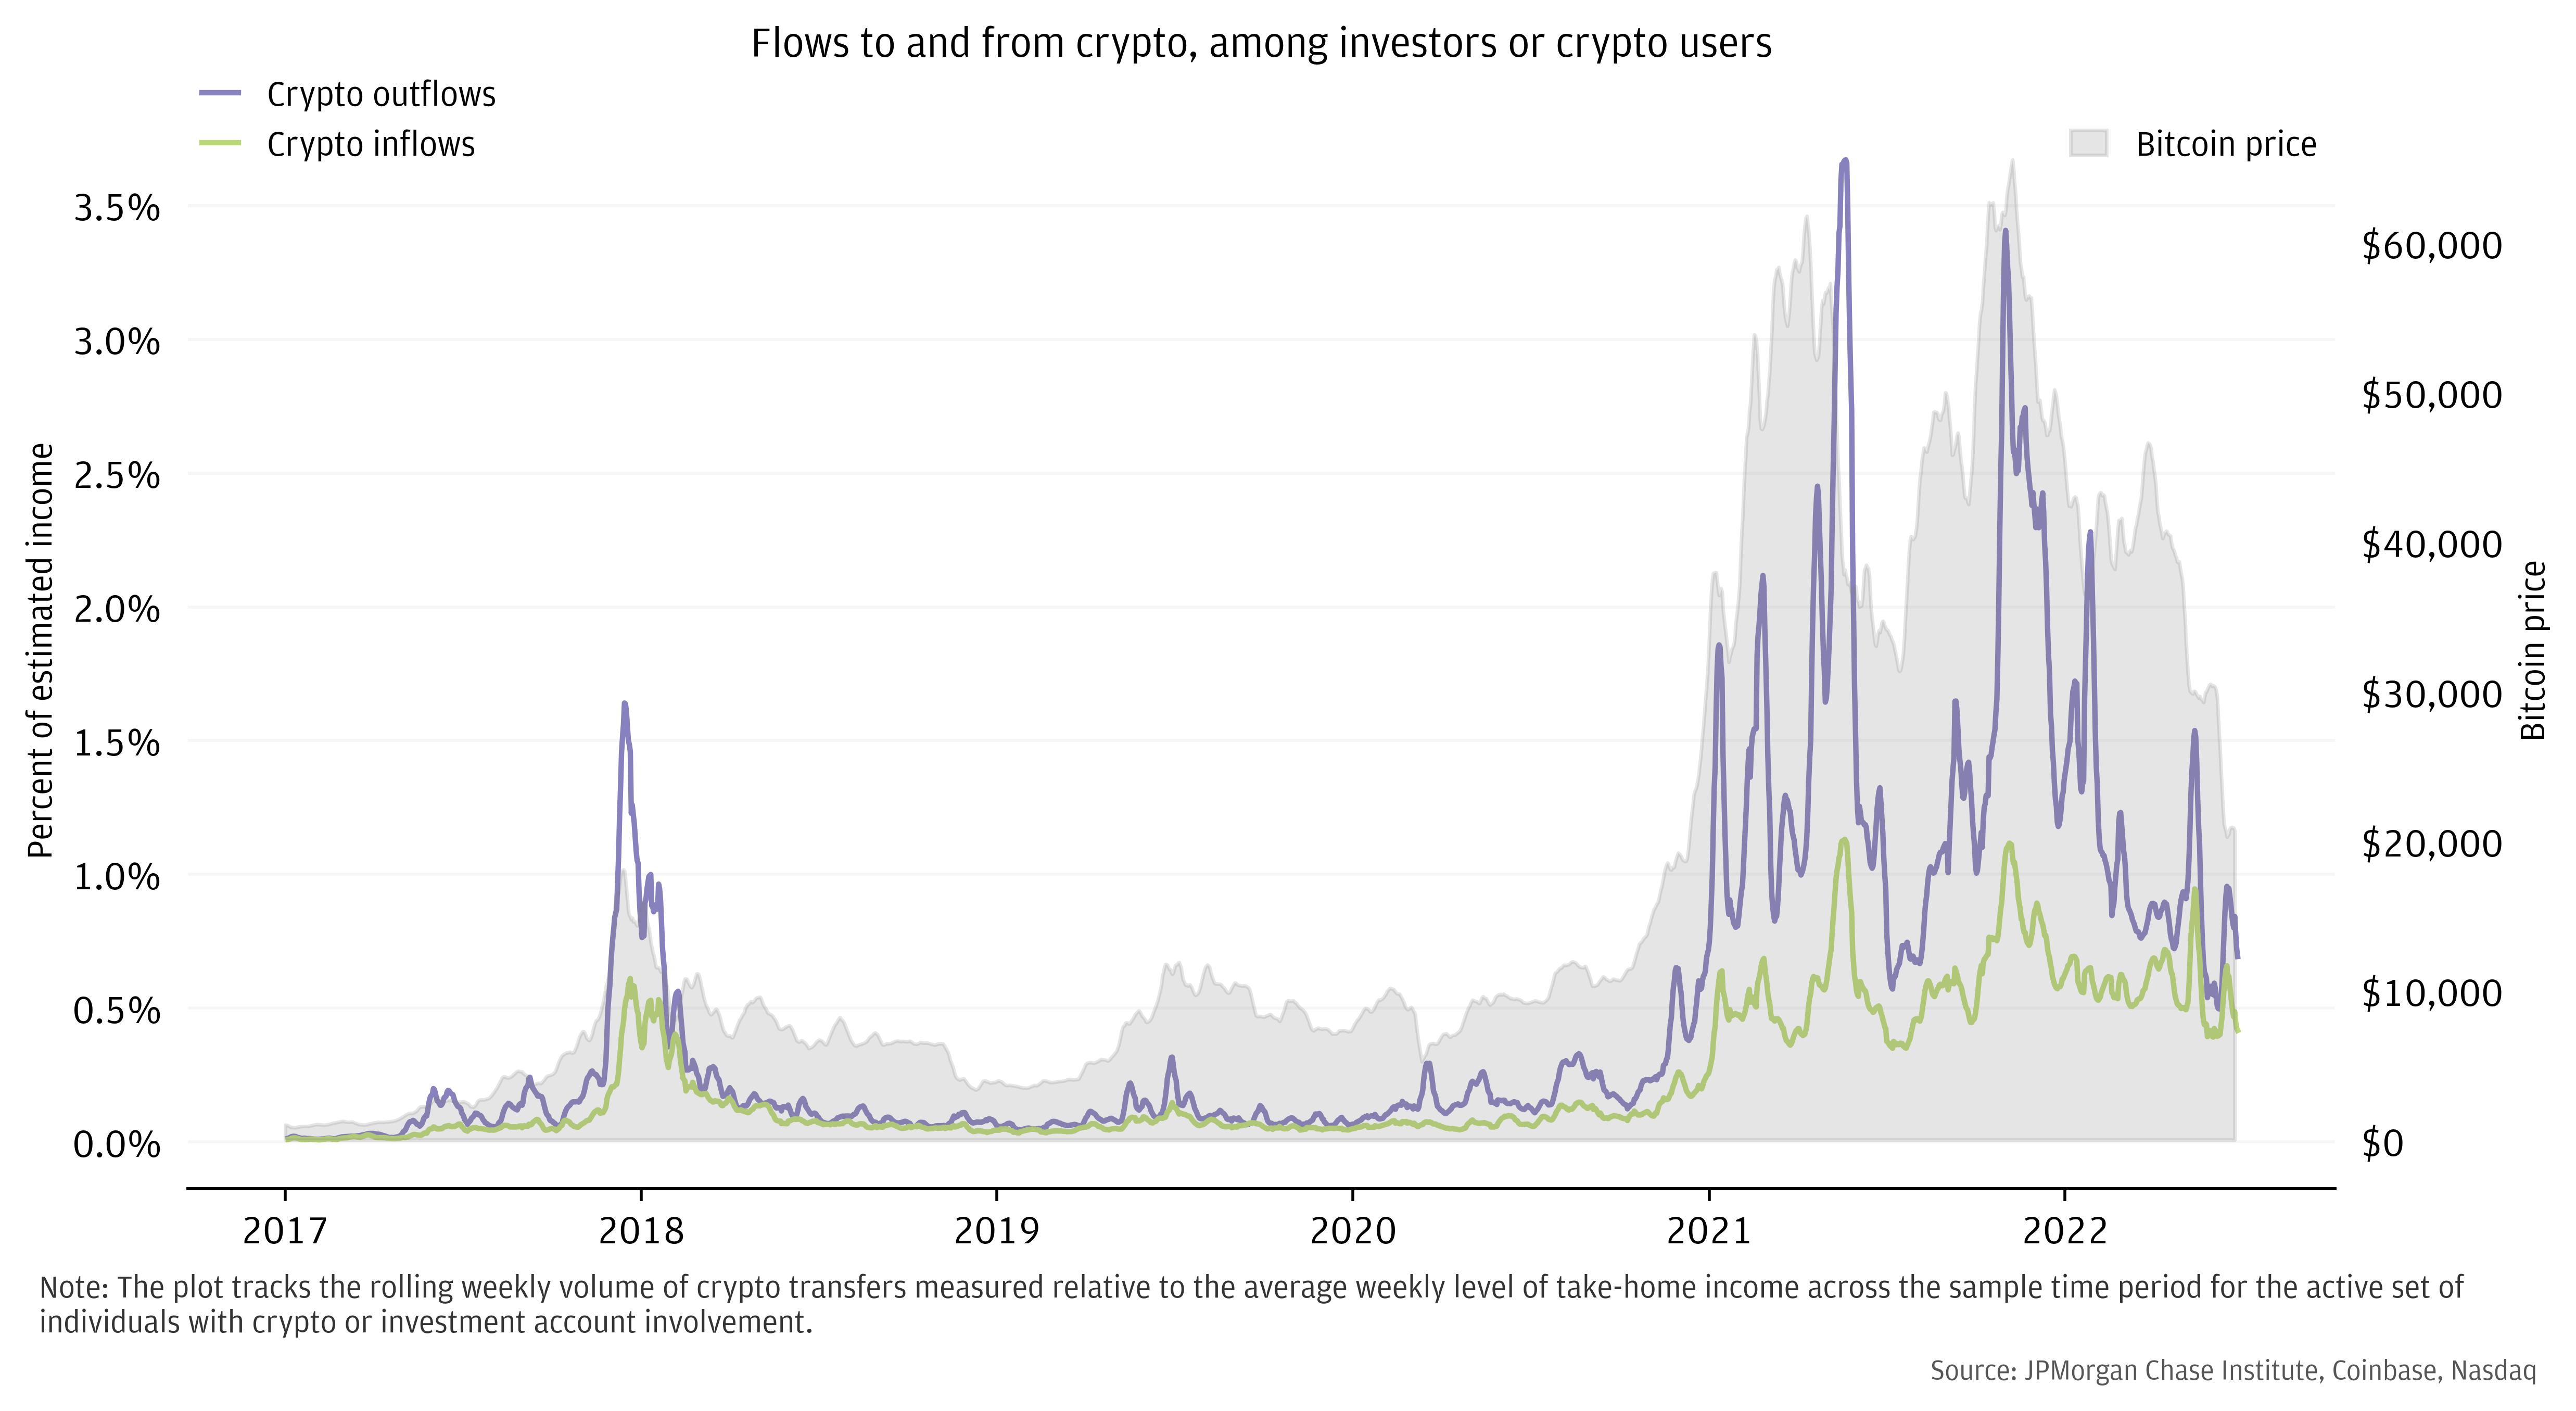 For most of the past several years, retail investor outflows to crypto accounts far exceeded inflows from those accounts, but the net direction of transfers became more balanced alongside crypto price declines in the first half of 2022.